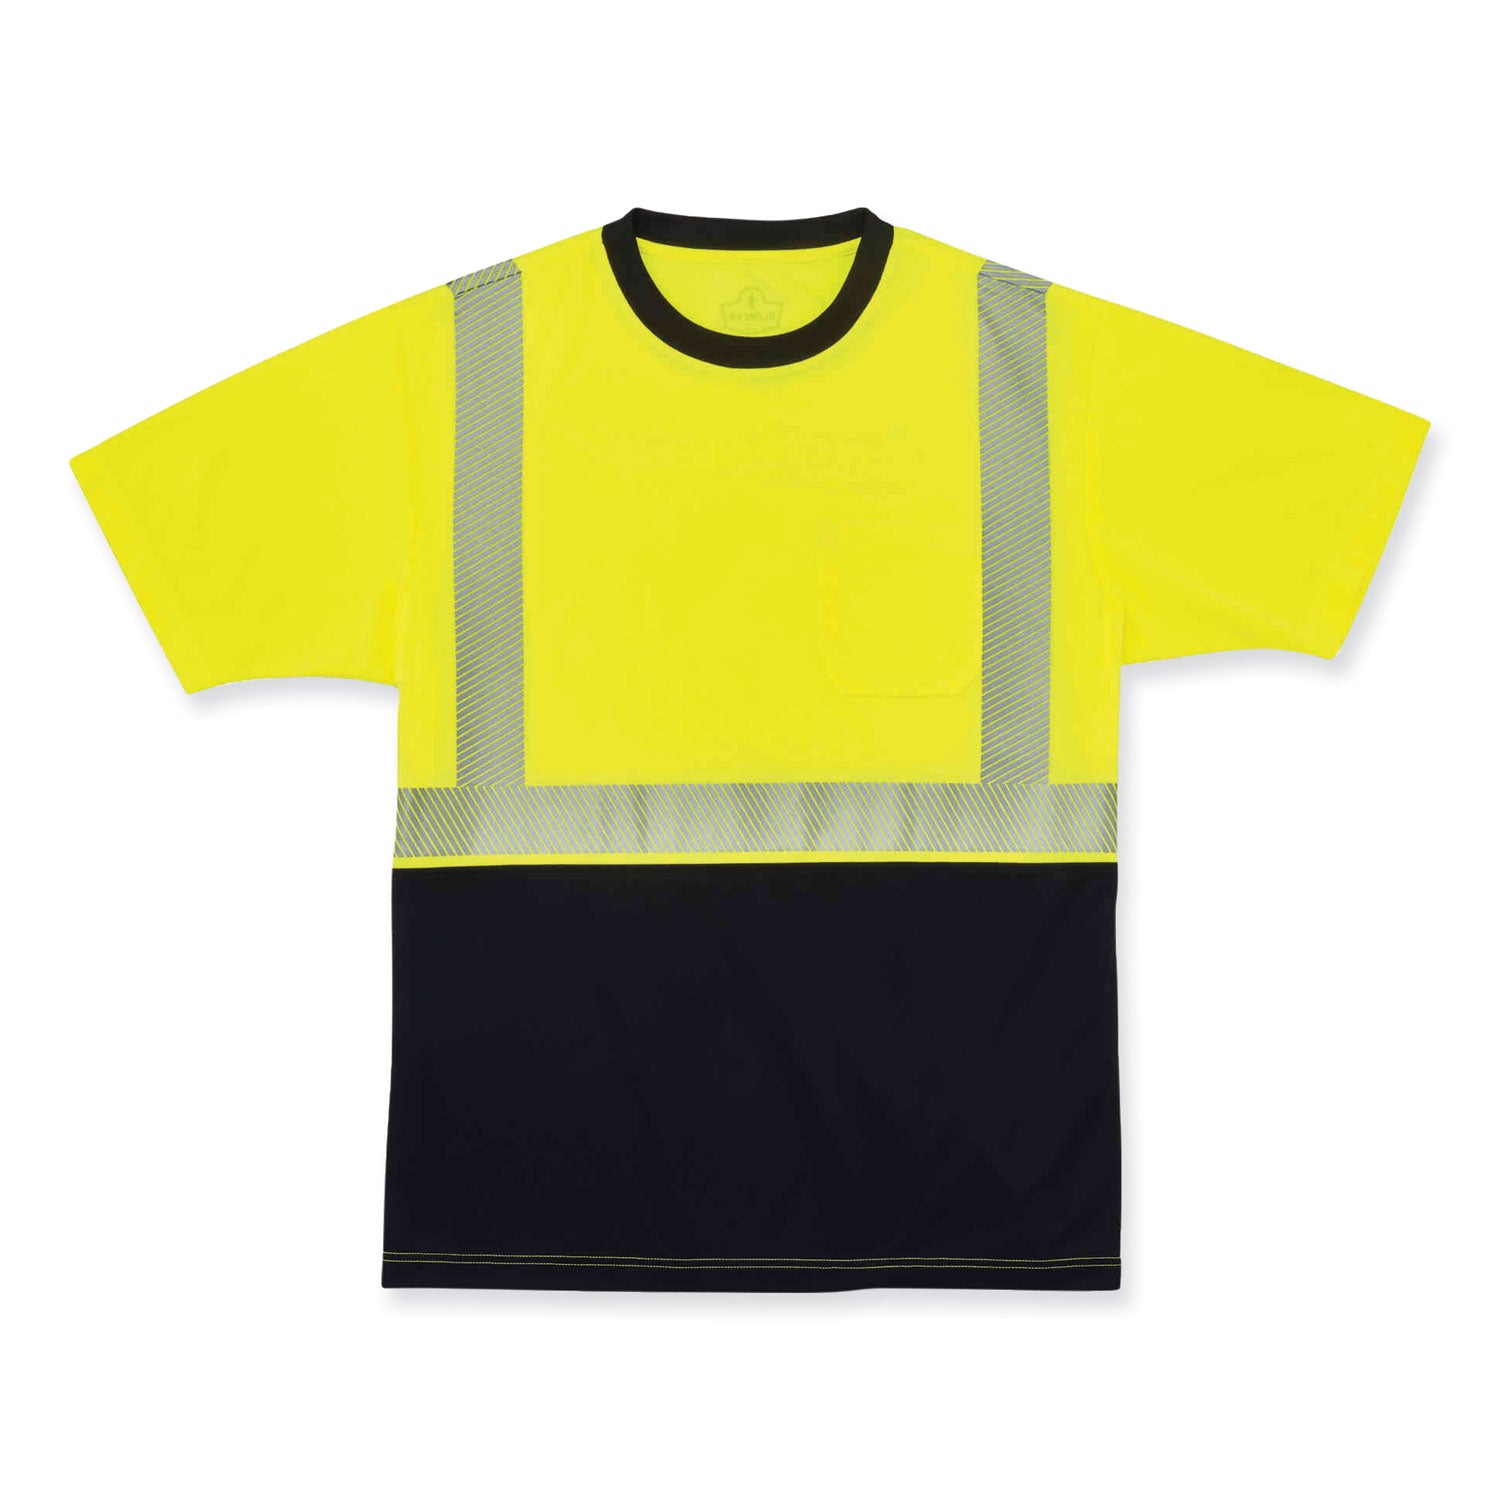 glowear-8280bk-class-2-performance-t-shirt-with-black-bottom-polyester-x-large-lime-ships-in-1-3-business-days_ego22535 - 1